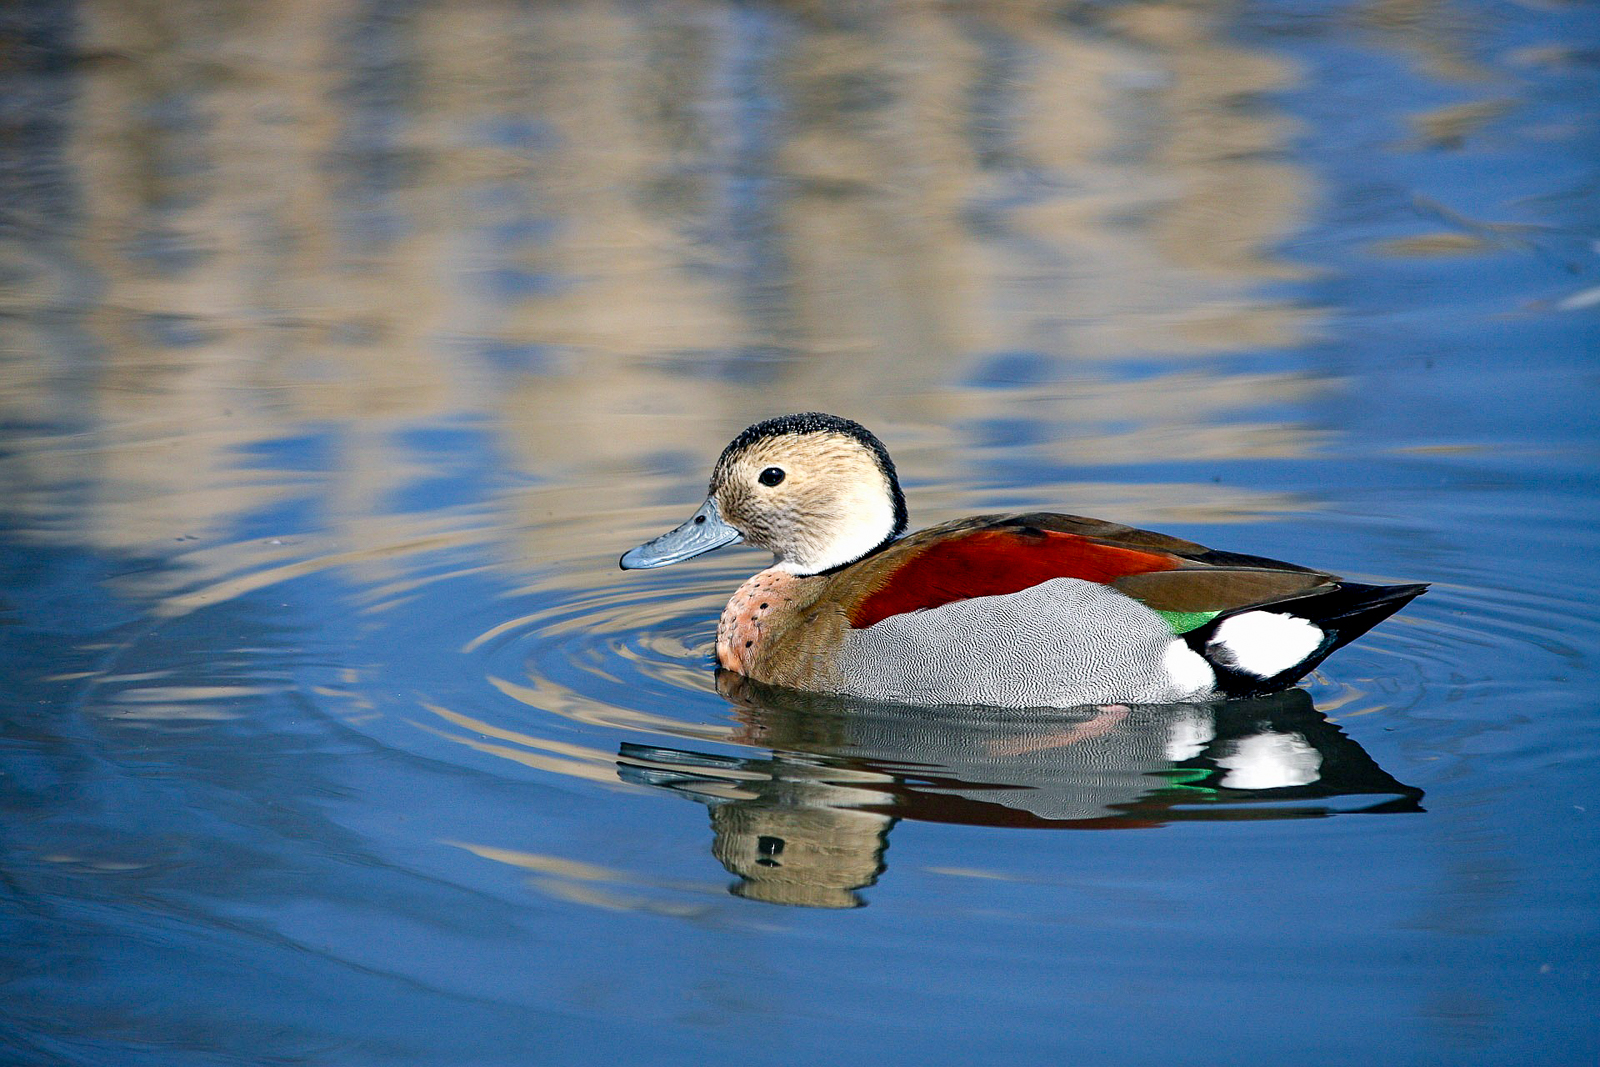 A ringed teal spotted in the Esteros de Farrapos National Park in Uruguay